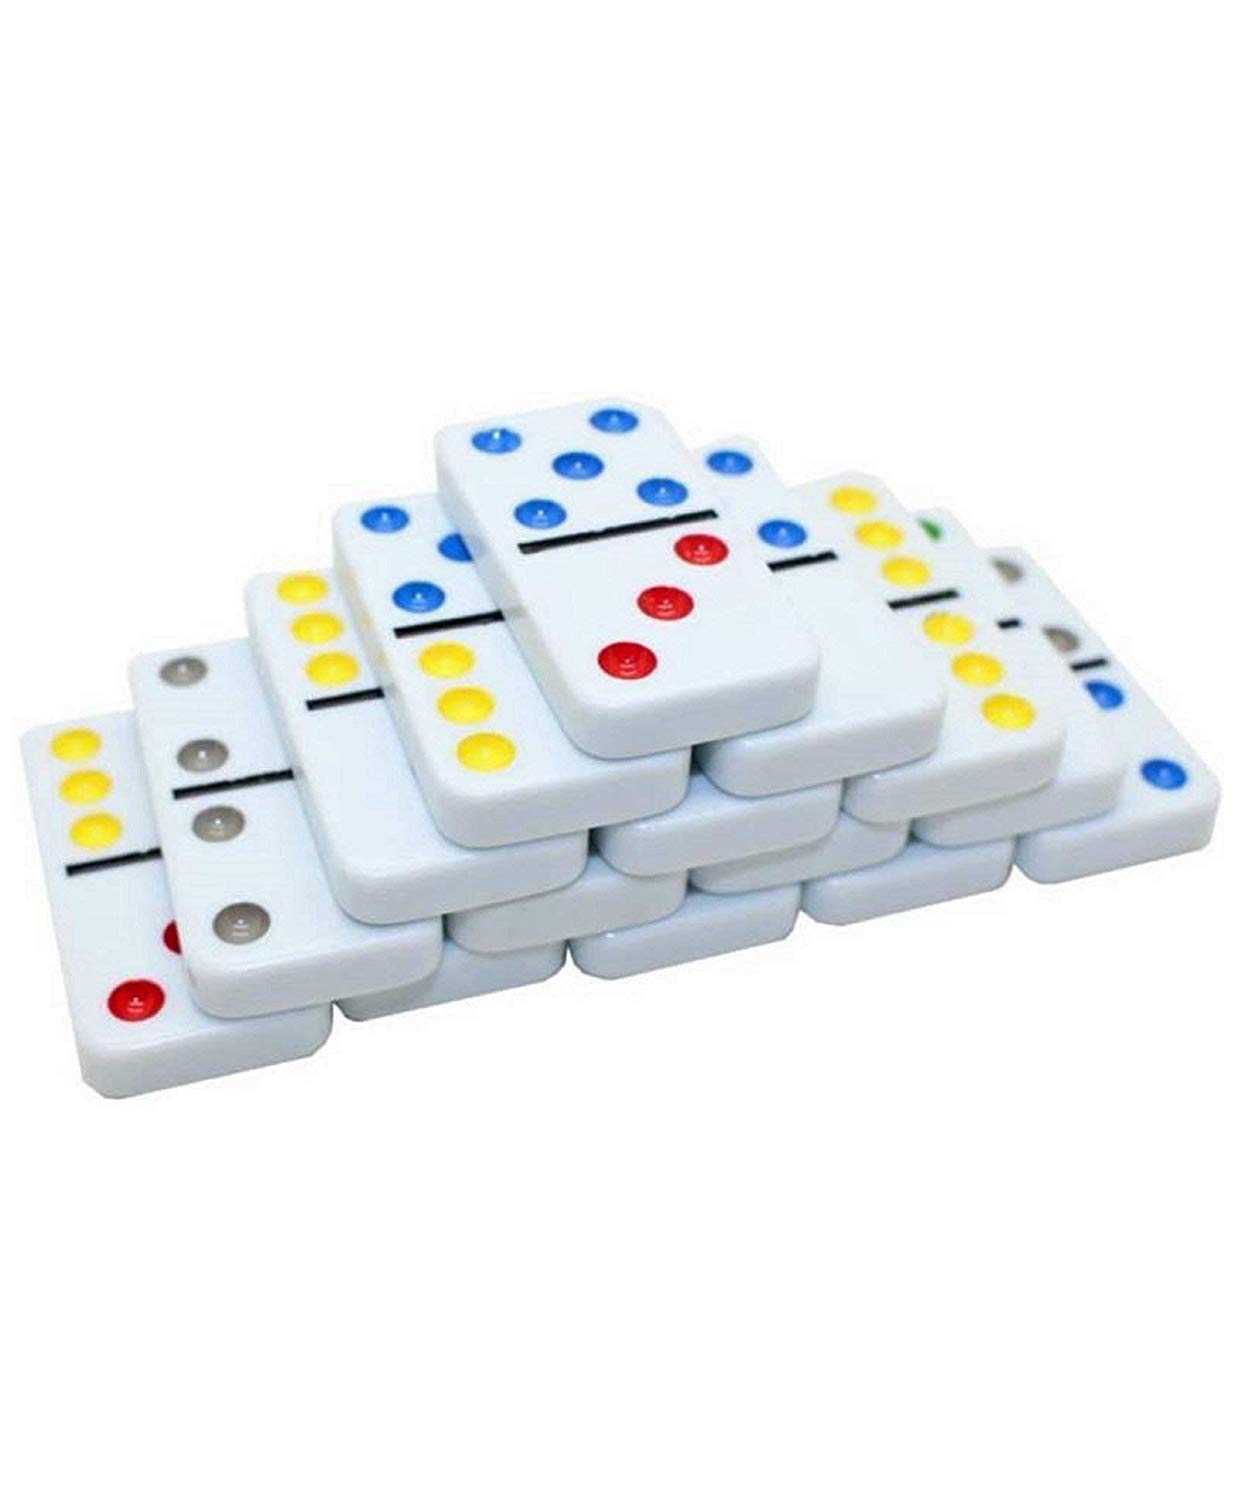 Double 6 Color Dot Dominoes Blocks for Party & Fun/ Dominoes Blocks Set Board Game for Kids